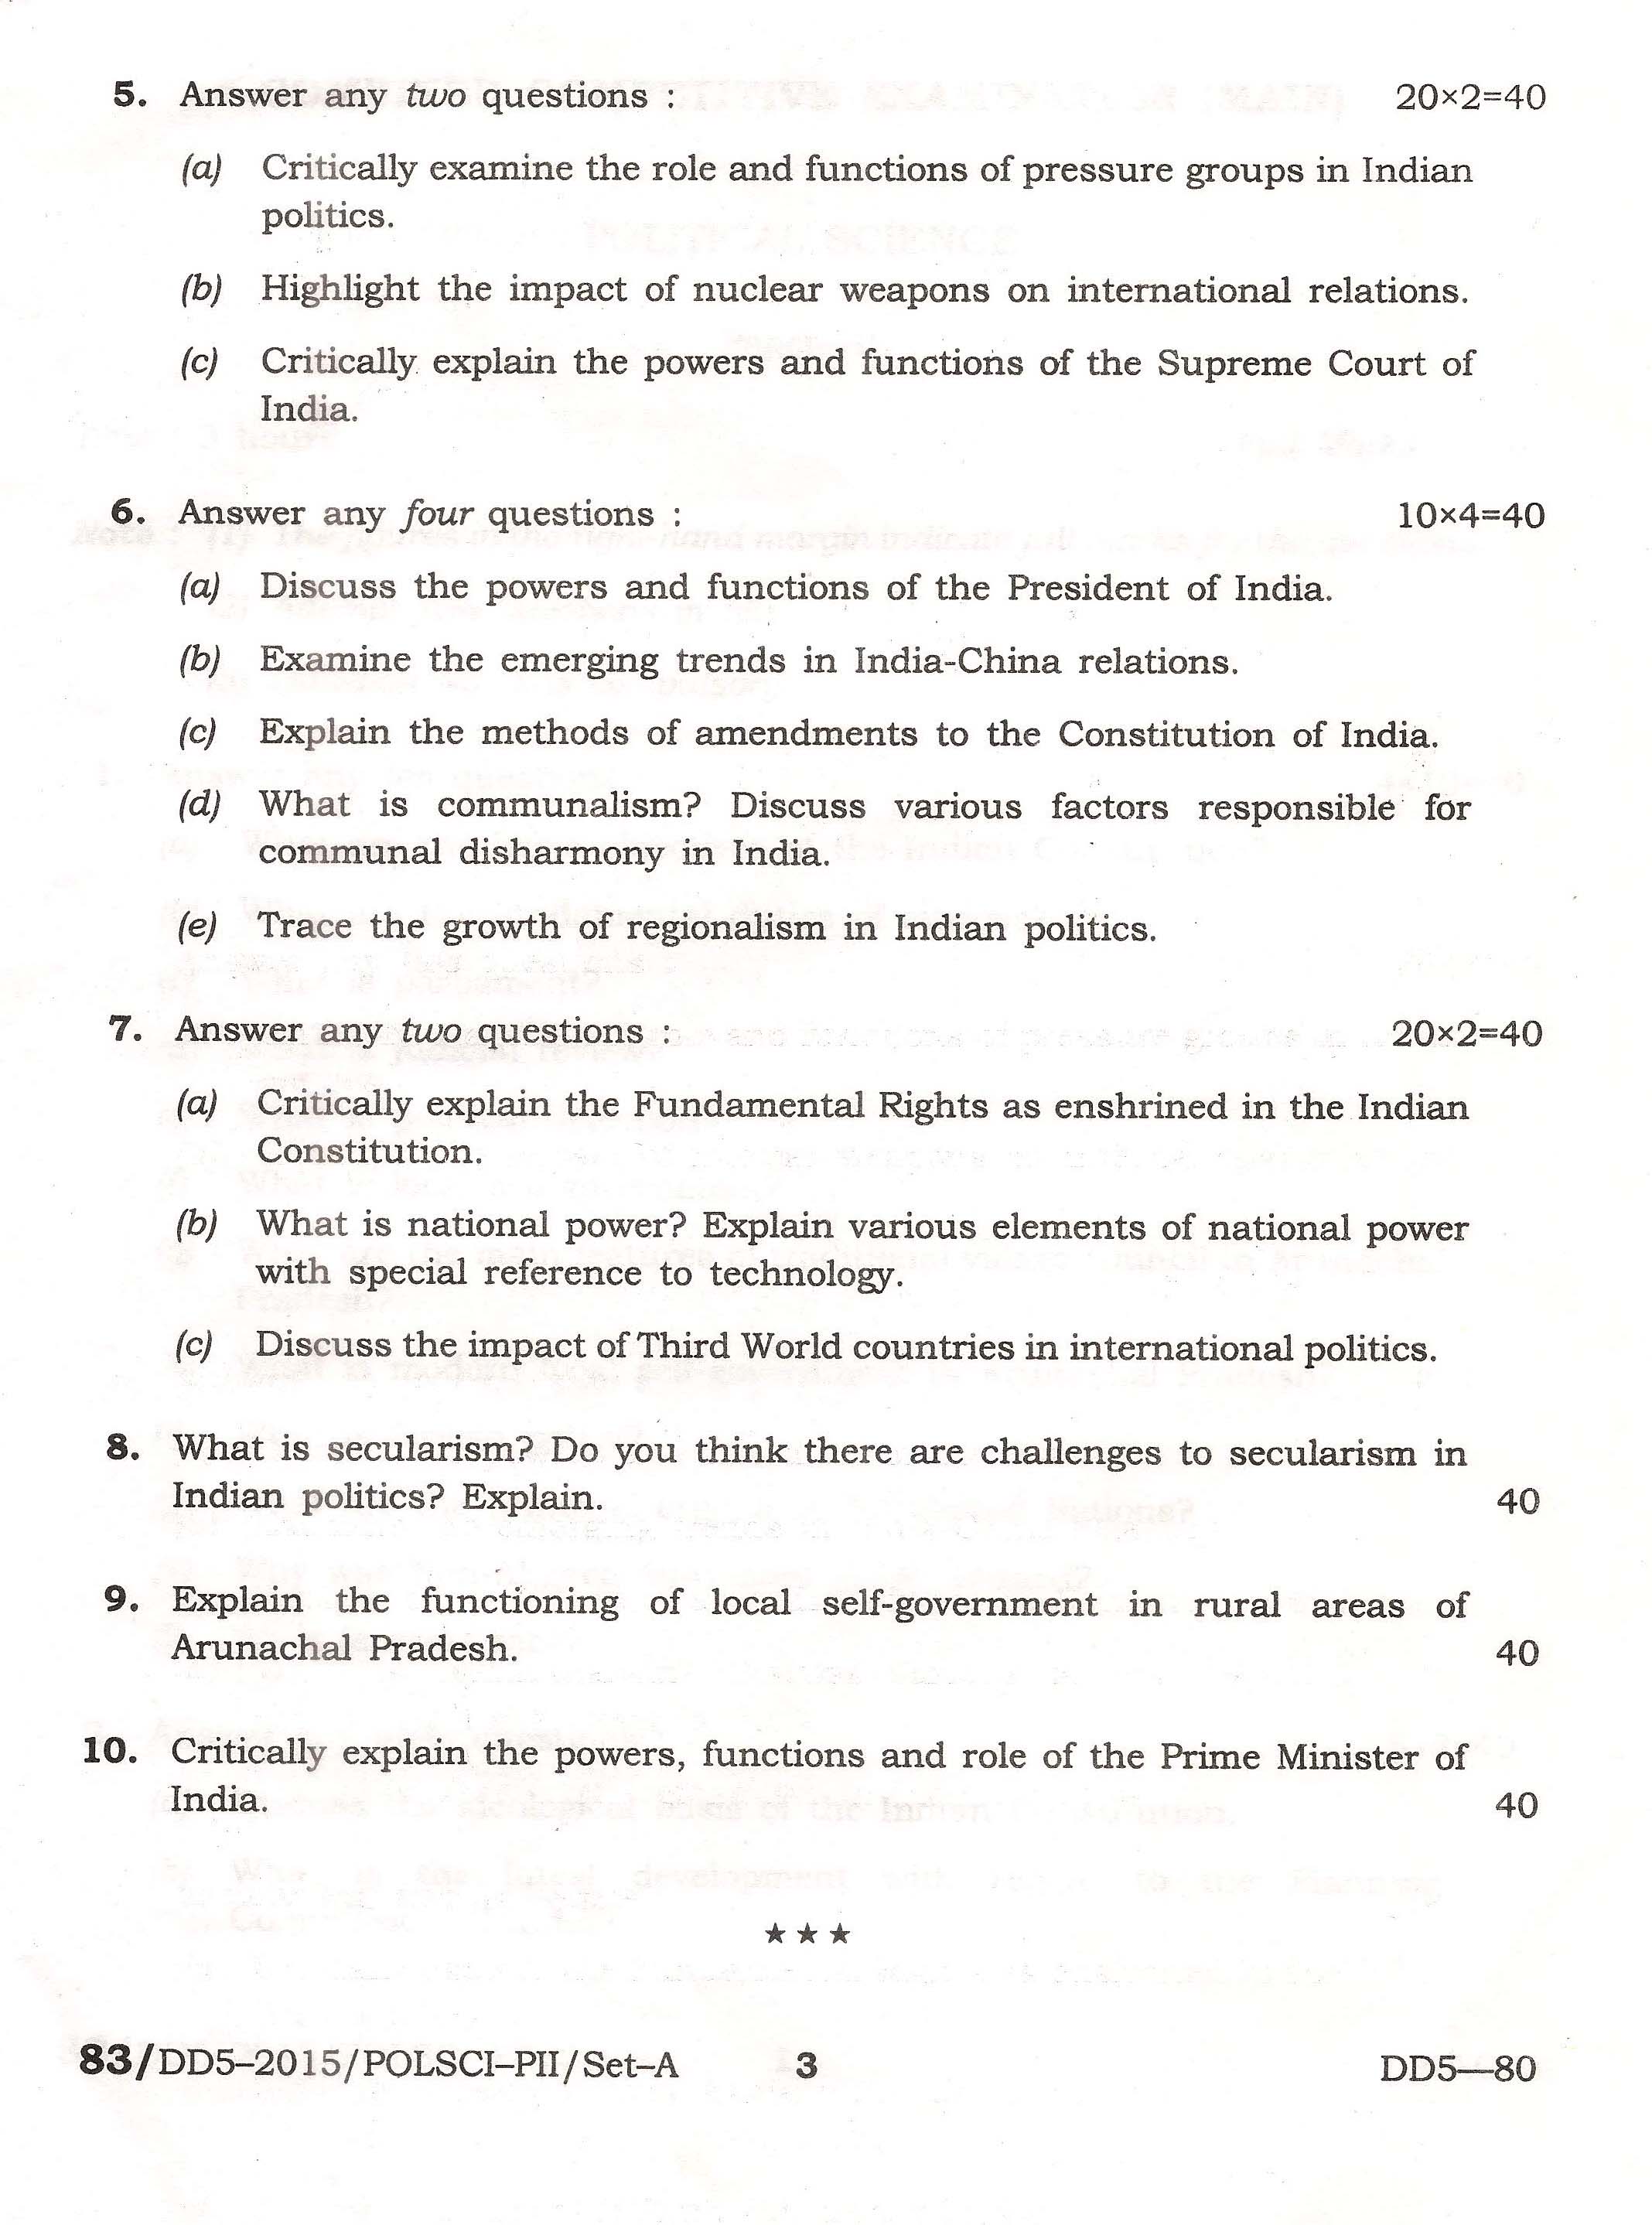 APPSC Combined Competitive Main Exam 2015 Political Science Paper II 3